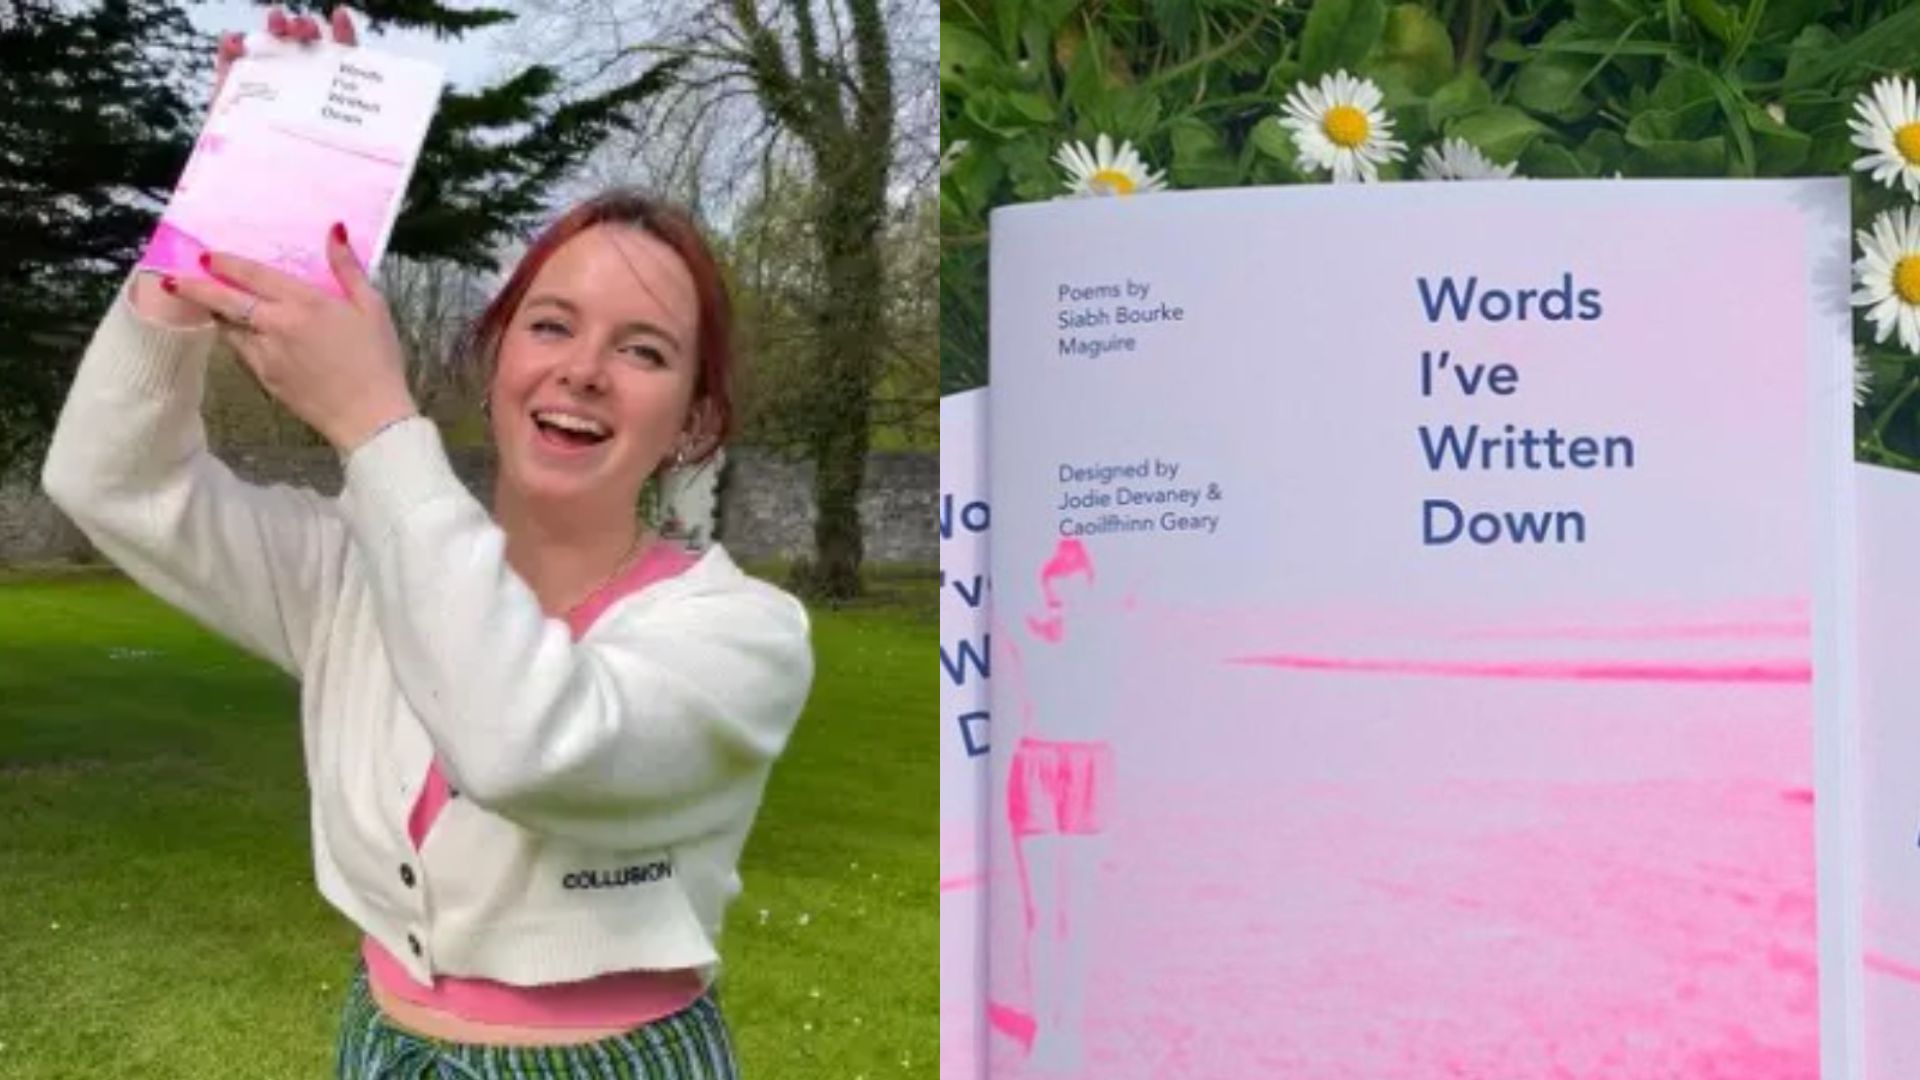 Words I've Written Down Words I've Written Down - A mini collection of Limerick writer Siabh Bourke Maguire's work has been compiled into a zine designed by LSAD print student Caoilfhinn Geary and graphic design student Jodie Devaney, titled 'Words I’ve Written Down'.